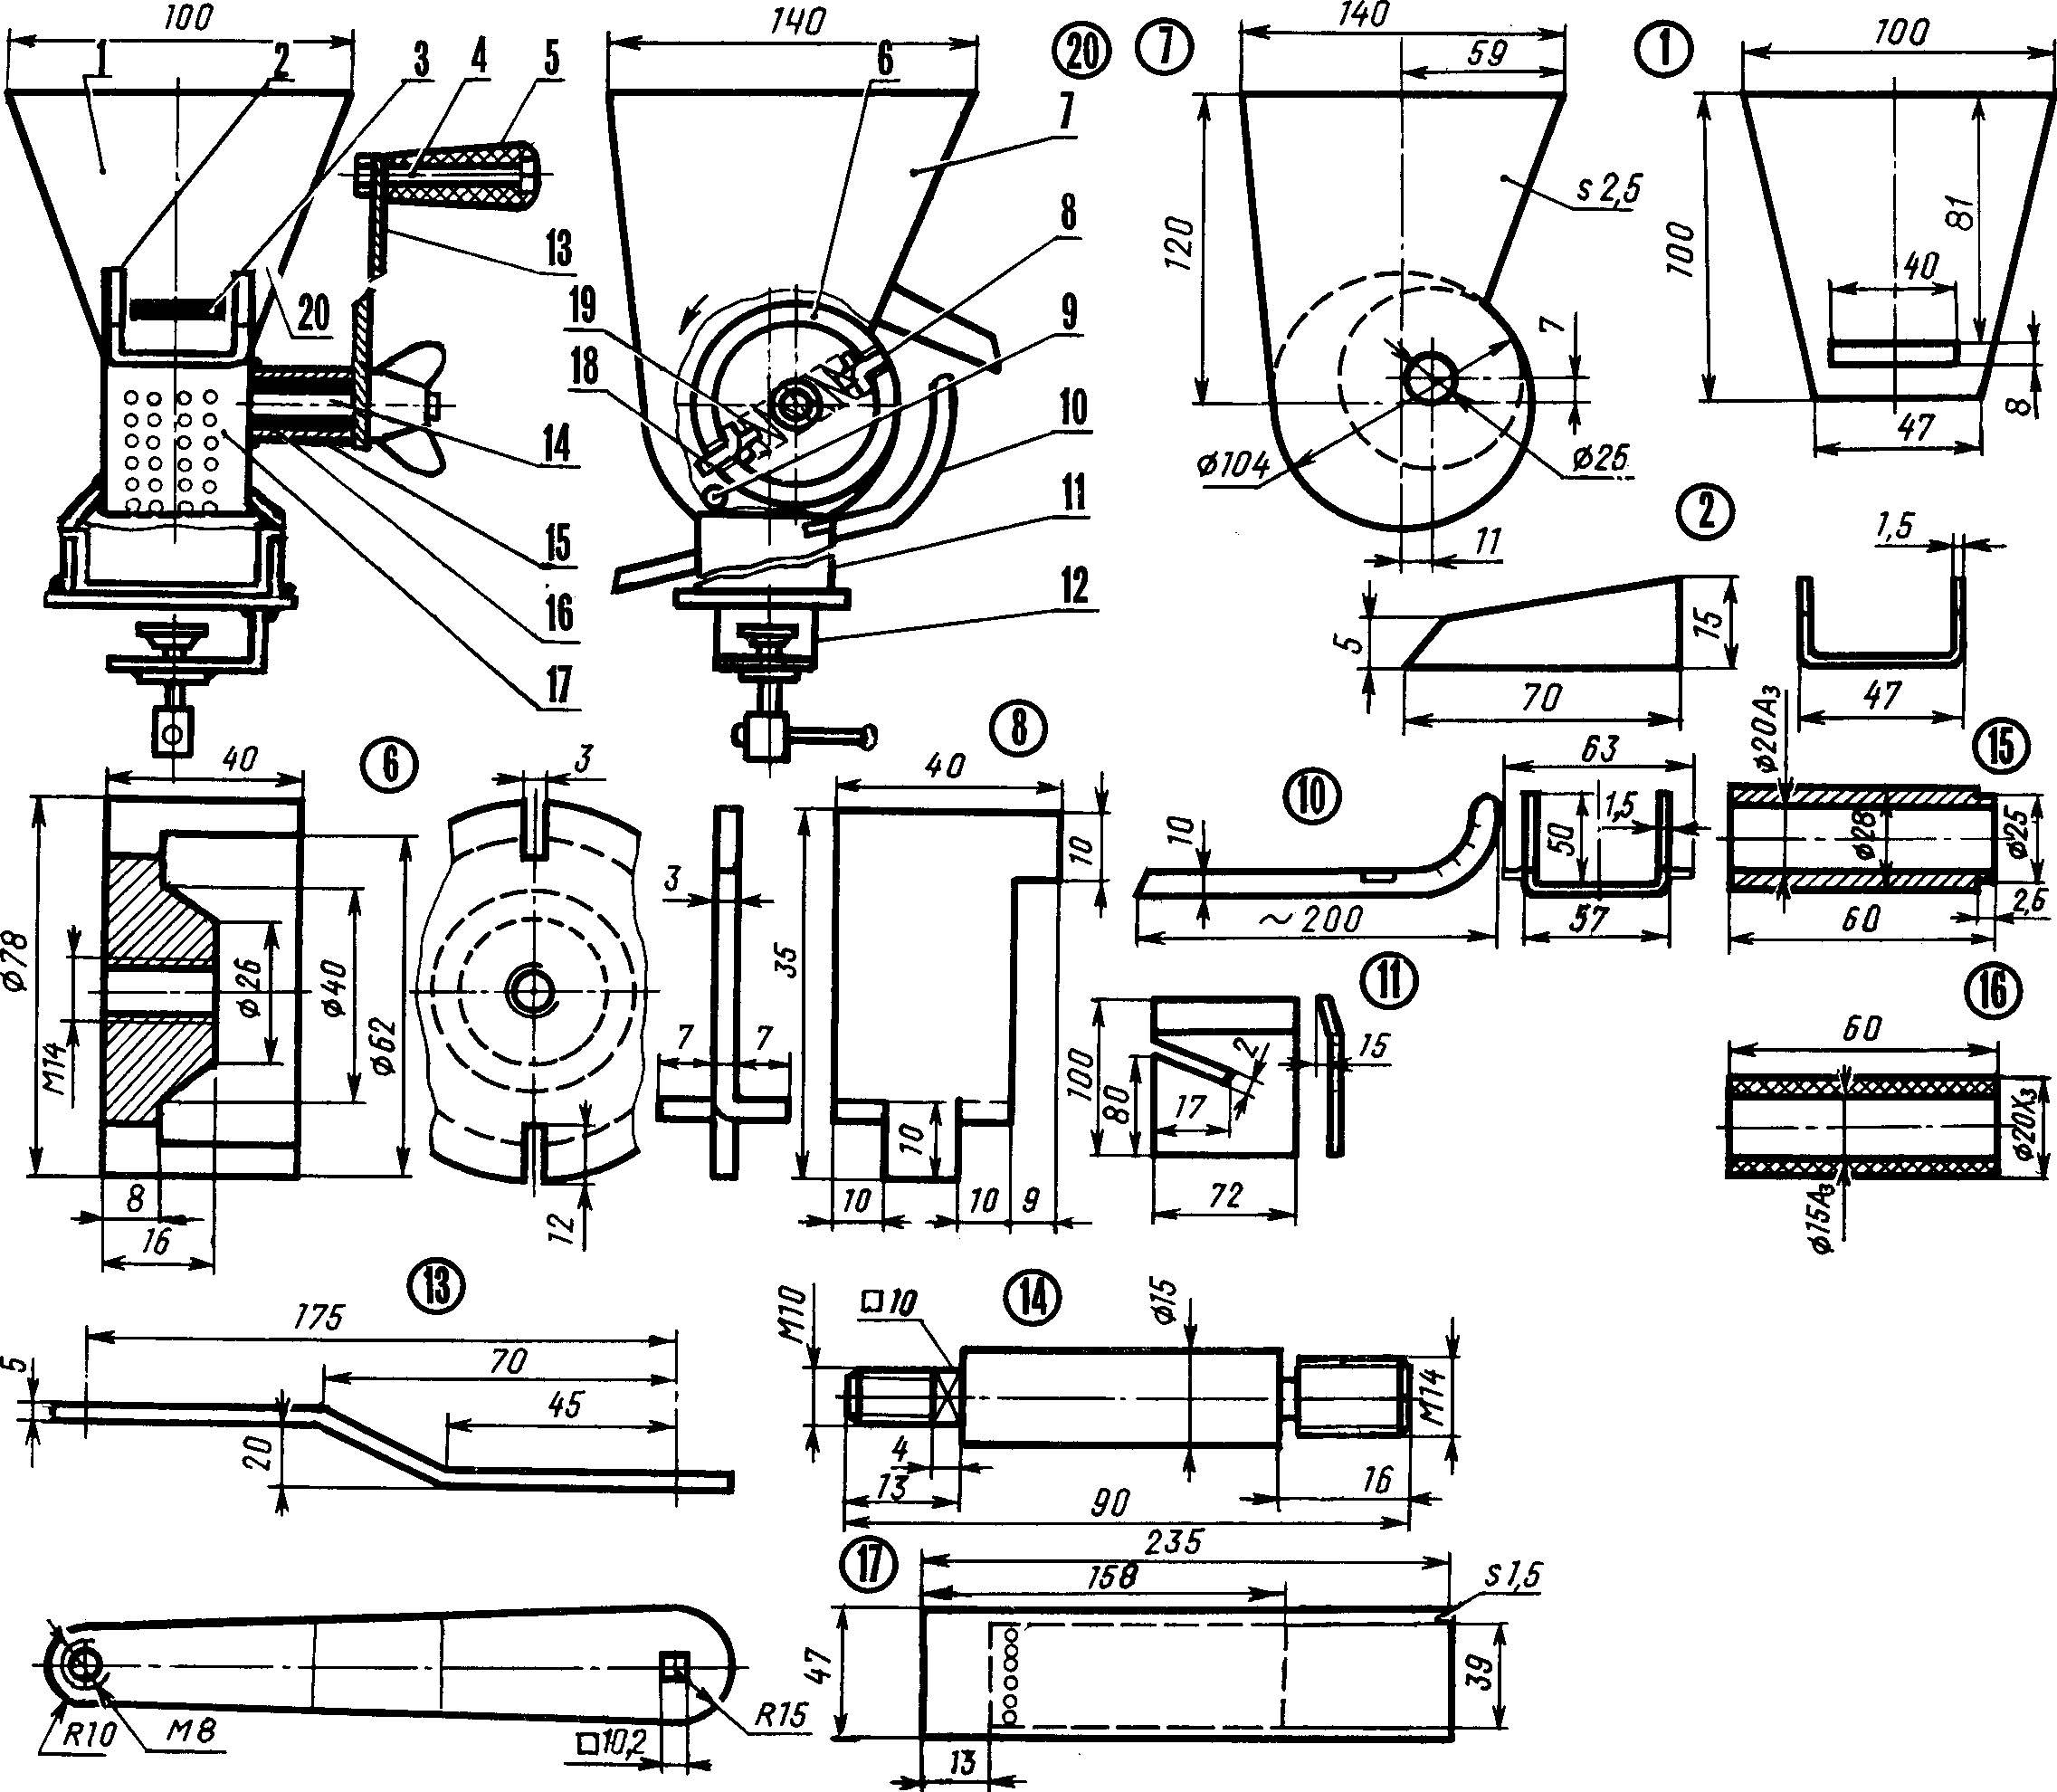 Fig. 2. The main parts of the juicer.